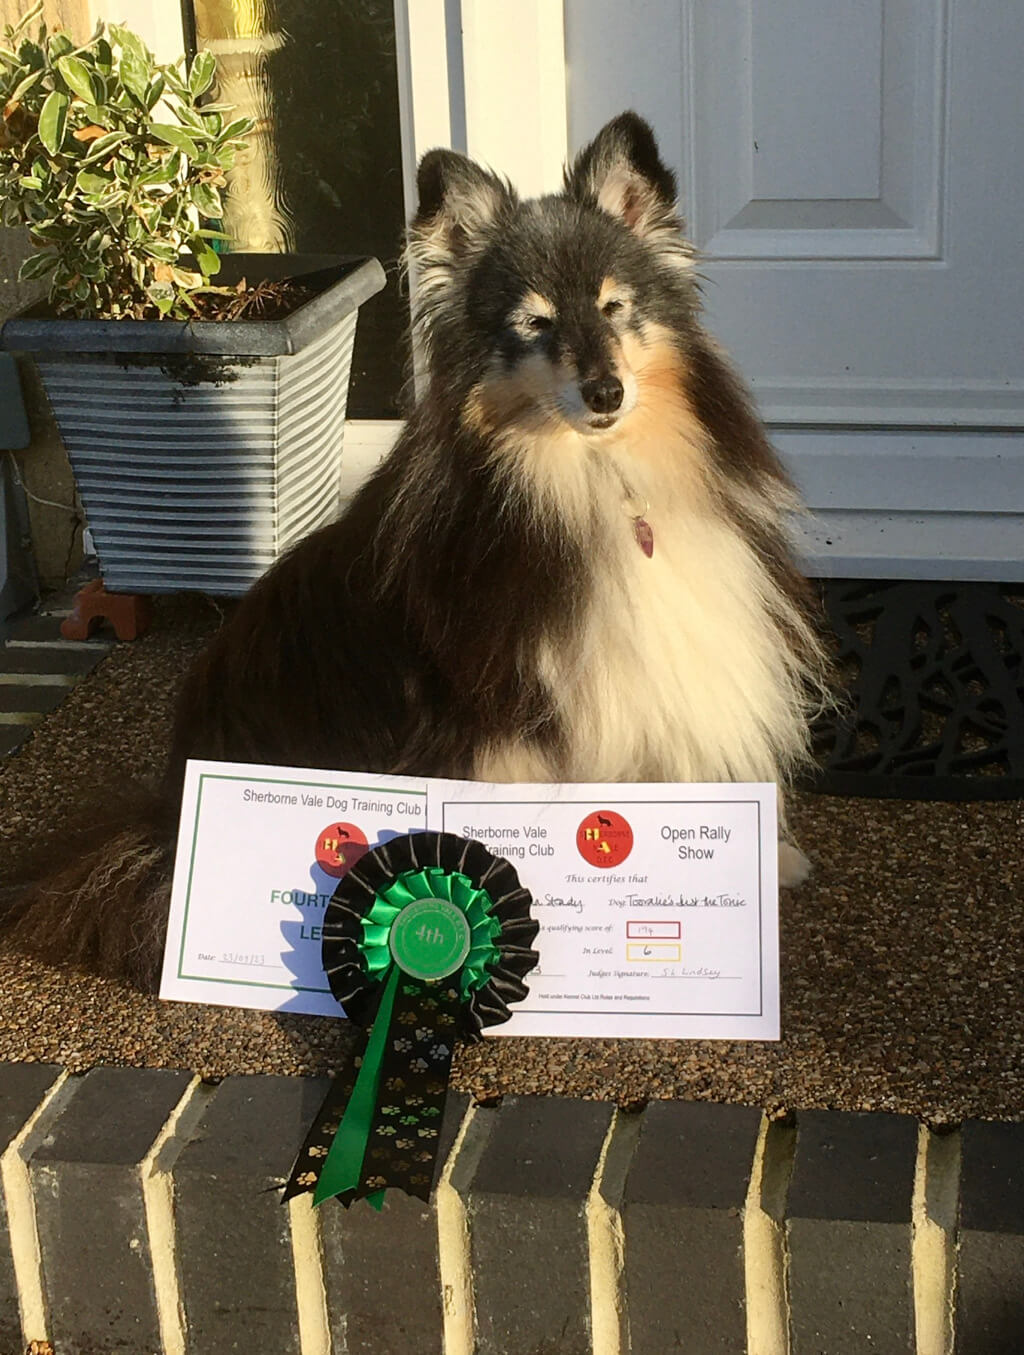 Toes the Shetland Sheepdog sits on a doorstep behind a 4th place rosette and Level 6 certificates from the Sherborne Vale DTC Open Rally Show